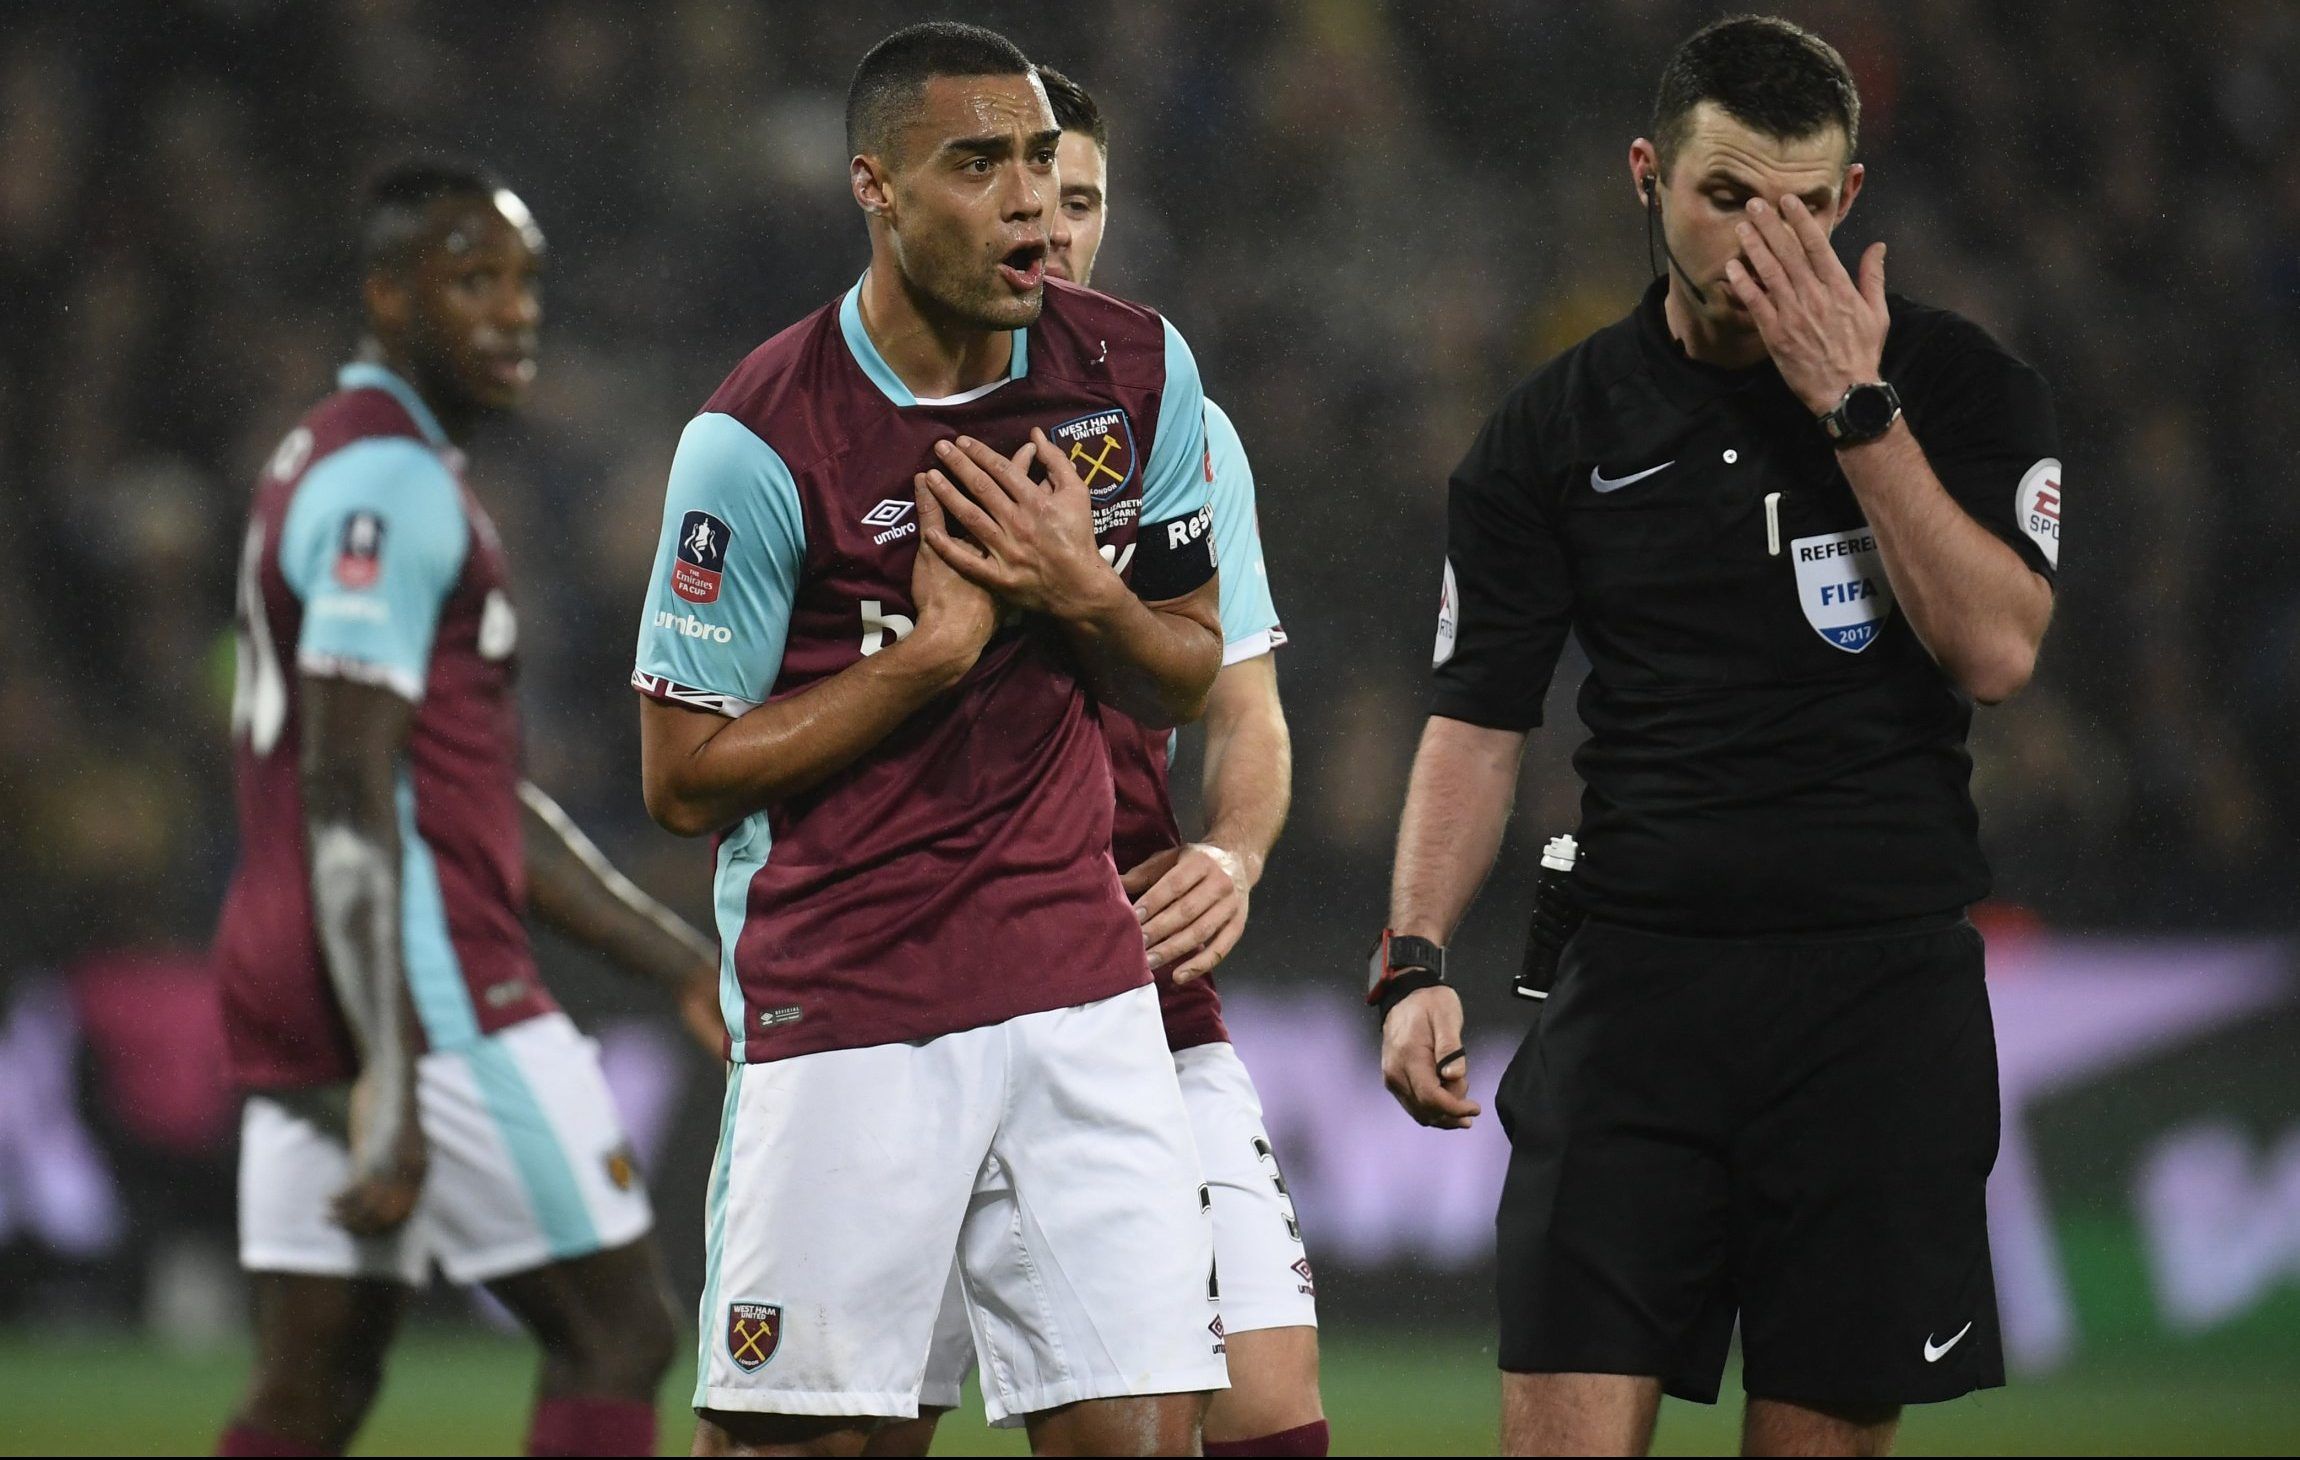 West Ham defender Winston Reid remonstrates with Michael Oliver after Manchester City are awarded a penalty